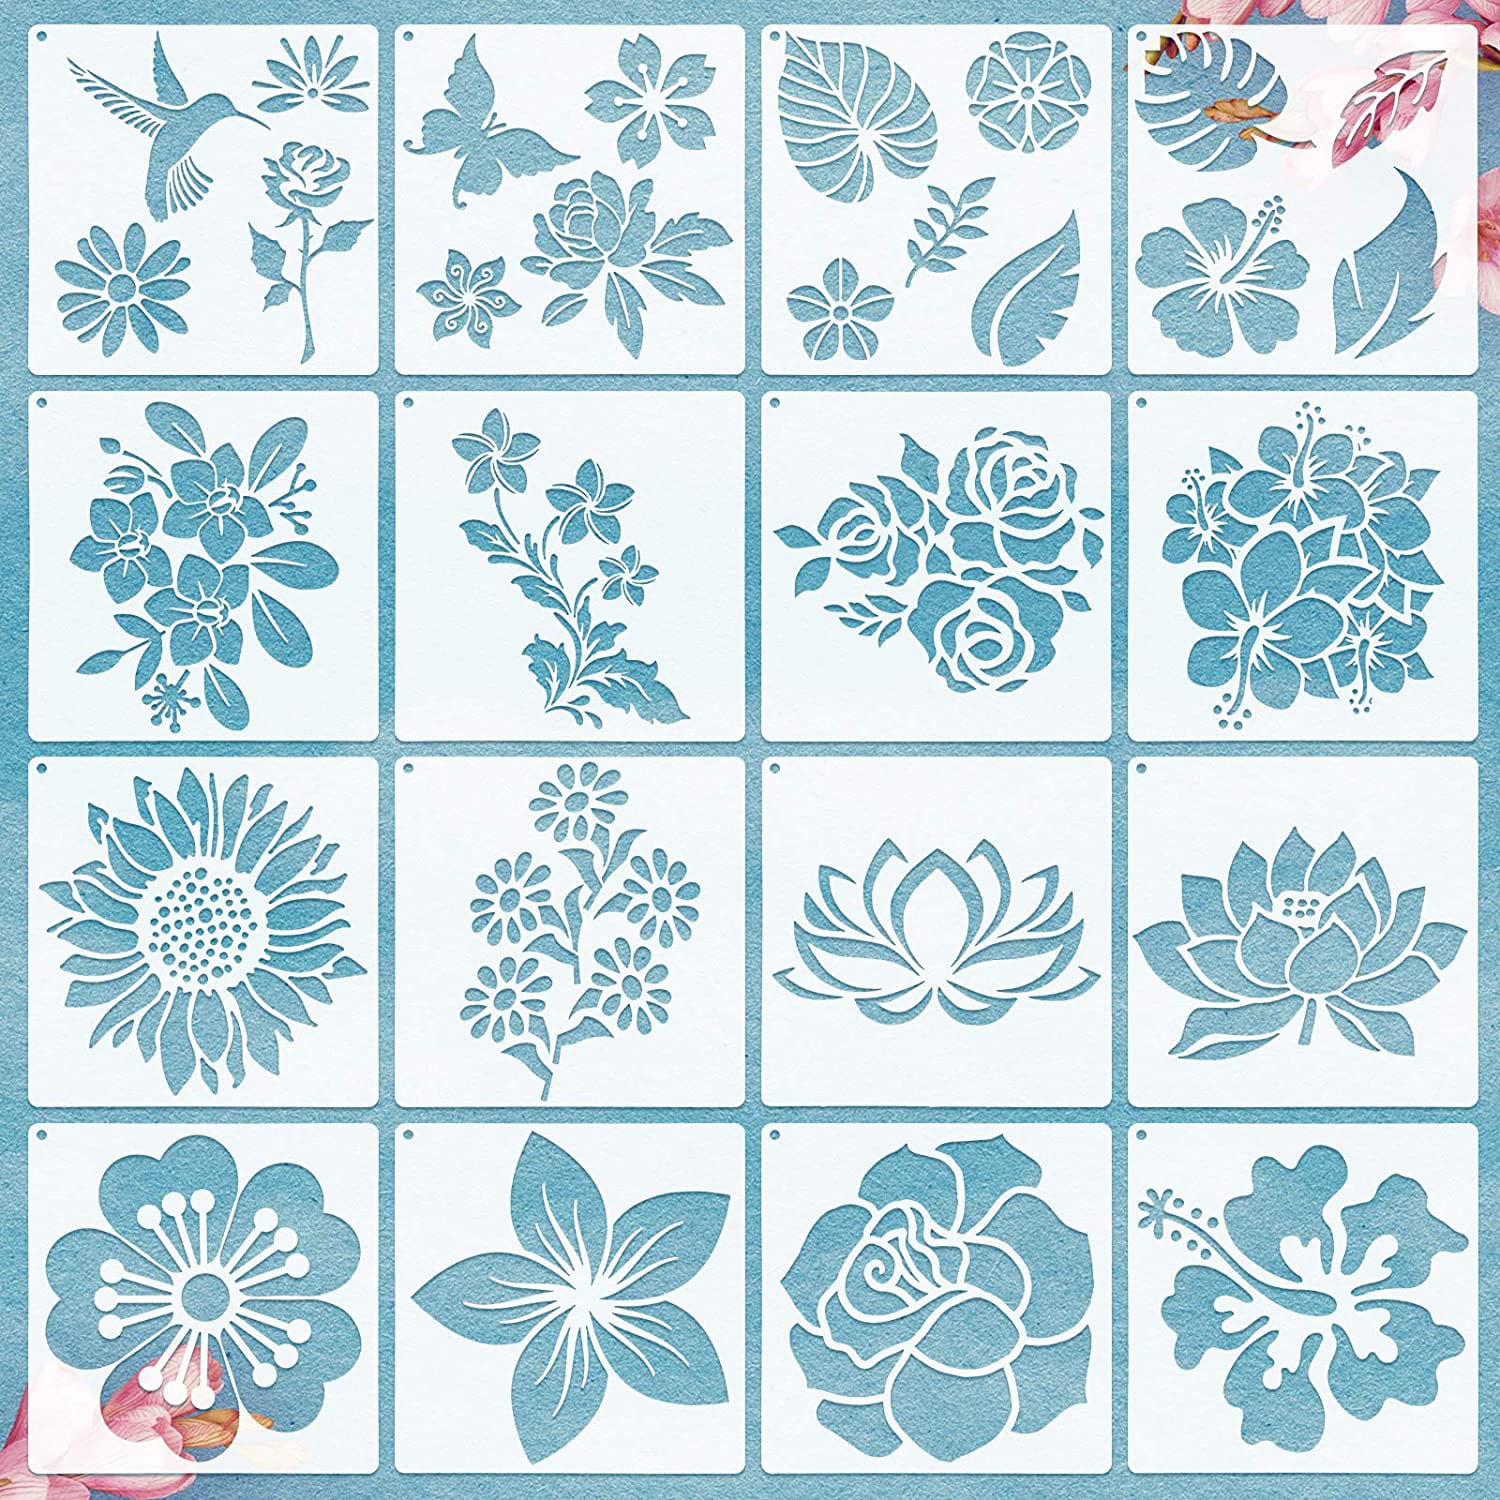 6 x 6 Inch 24 Pieces Flower Stencils Kit Rose Sunflower Floral Butterfly Bird Leaf Spring Summer Stencil Drawing Reusable Stencils Painting Template Stencil for Painting on Wood Wall Home Decor 